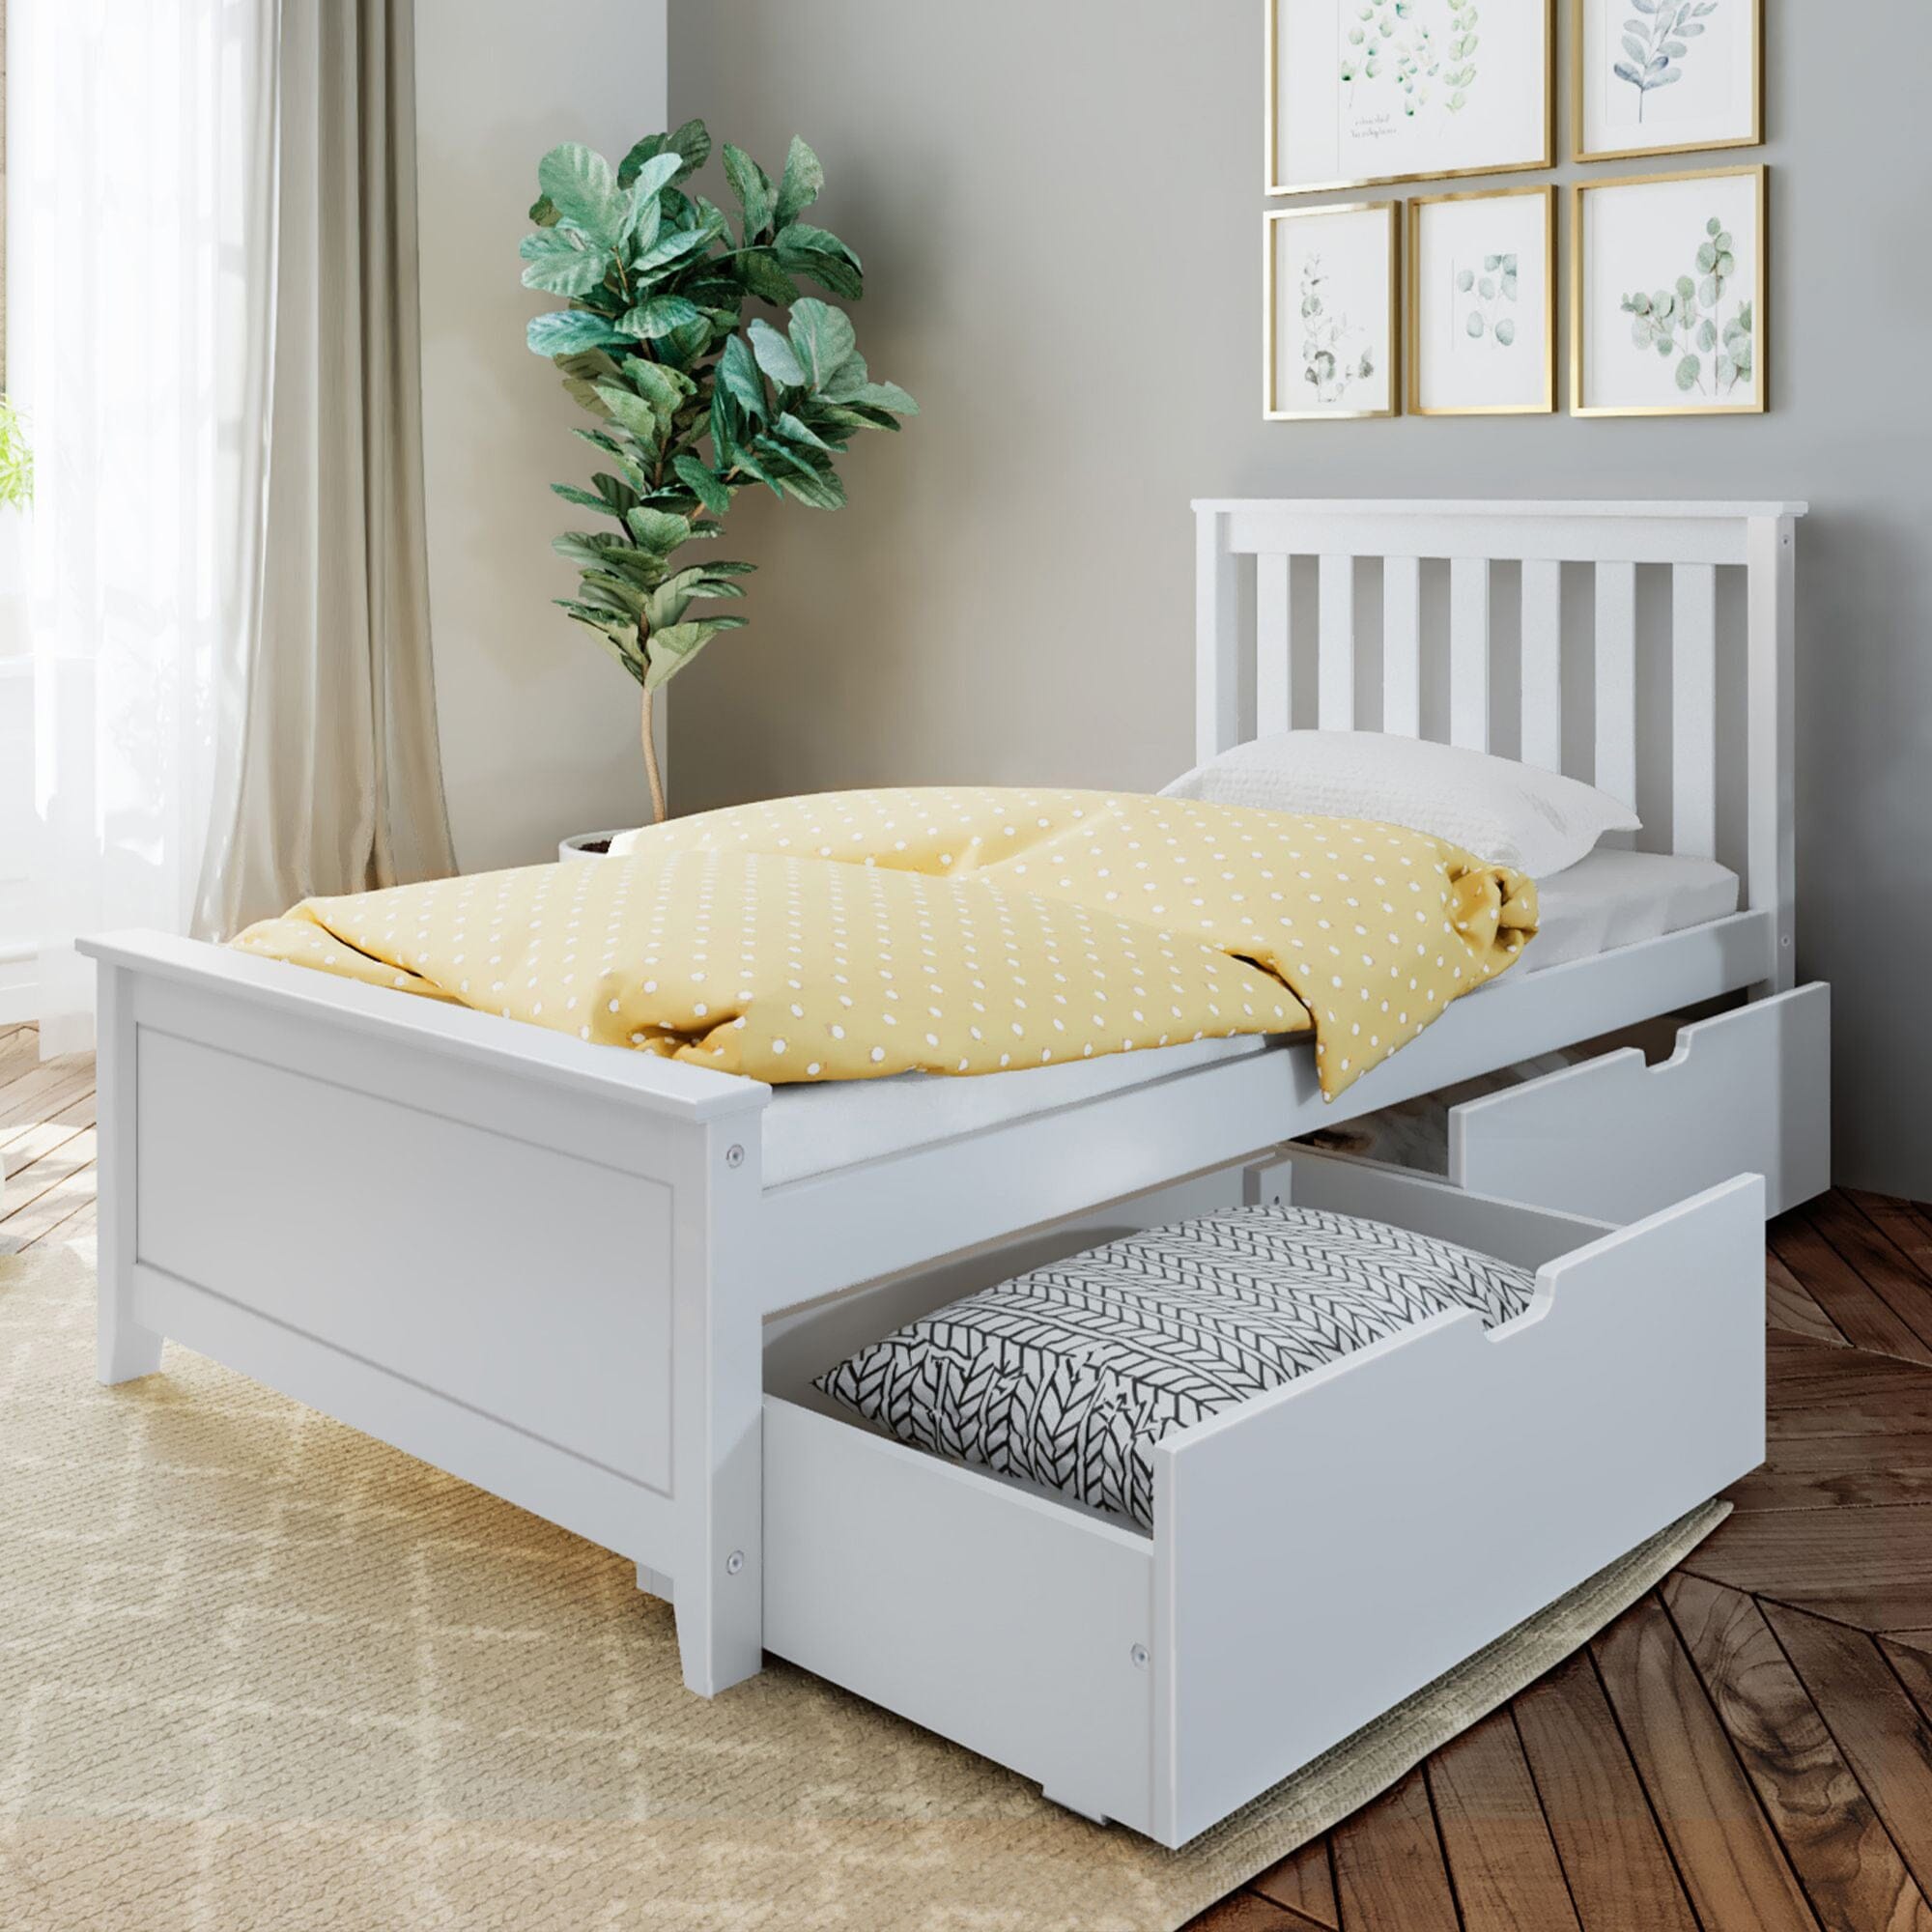 Image of Kid's Twin-Size Bed with Storage Drawers